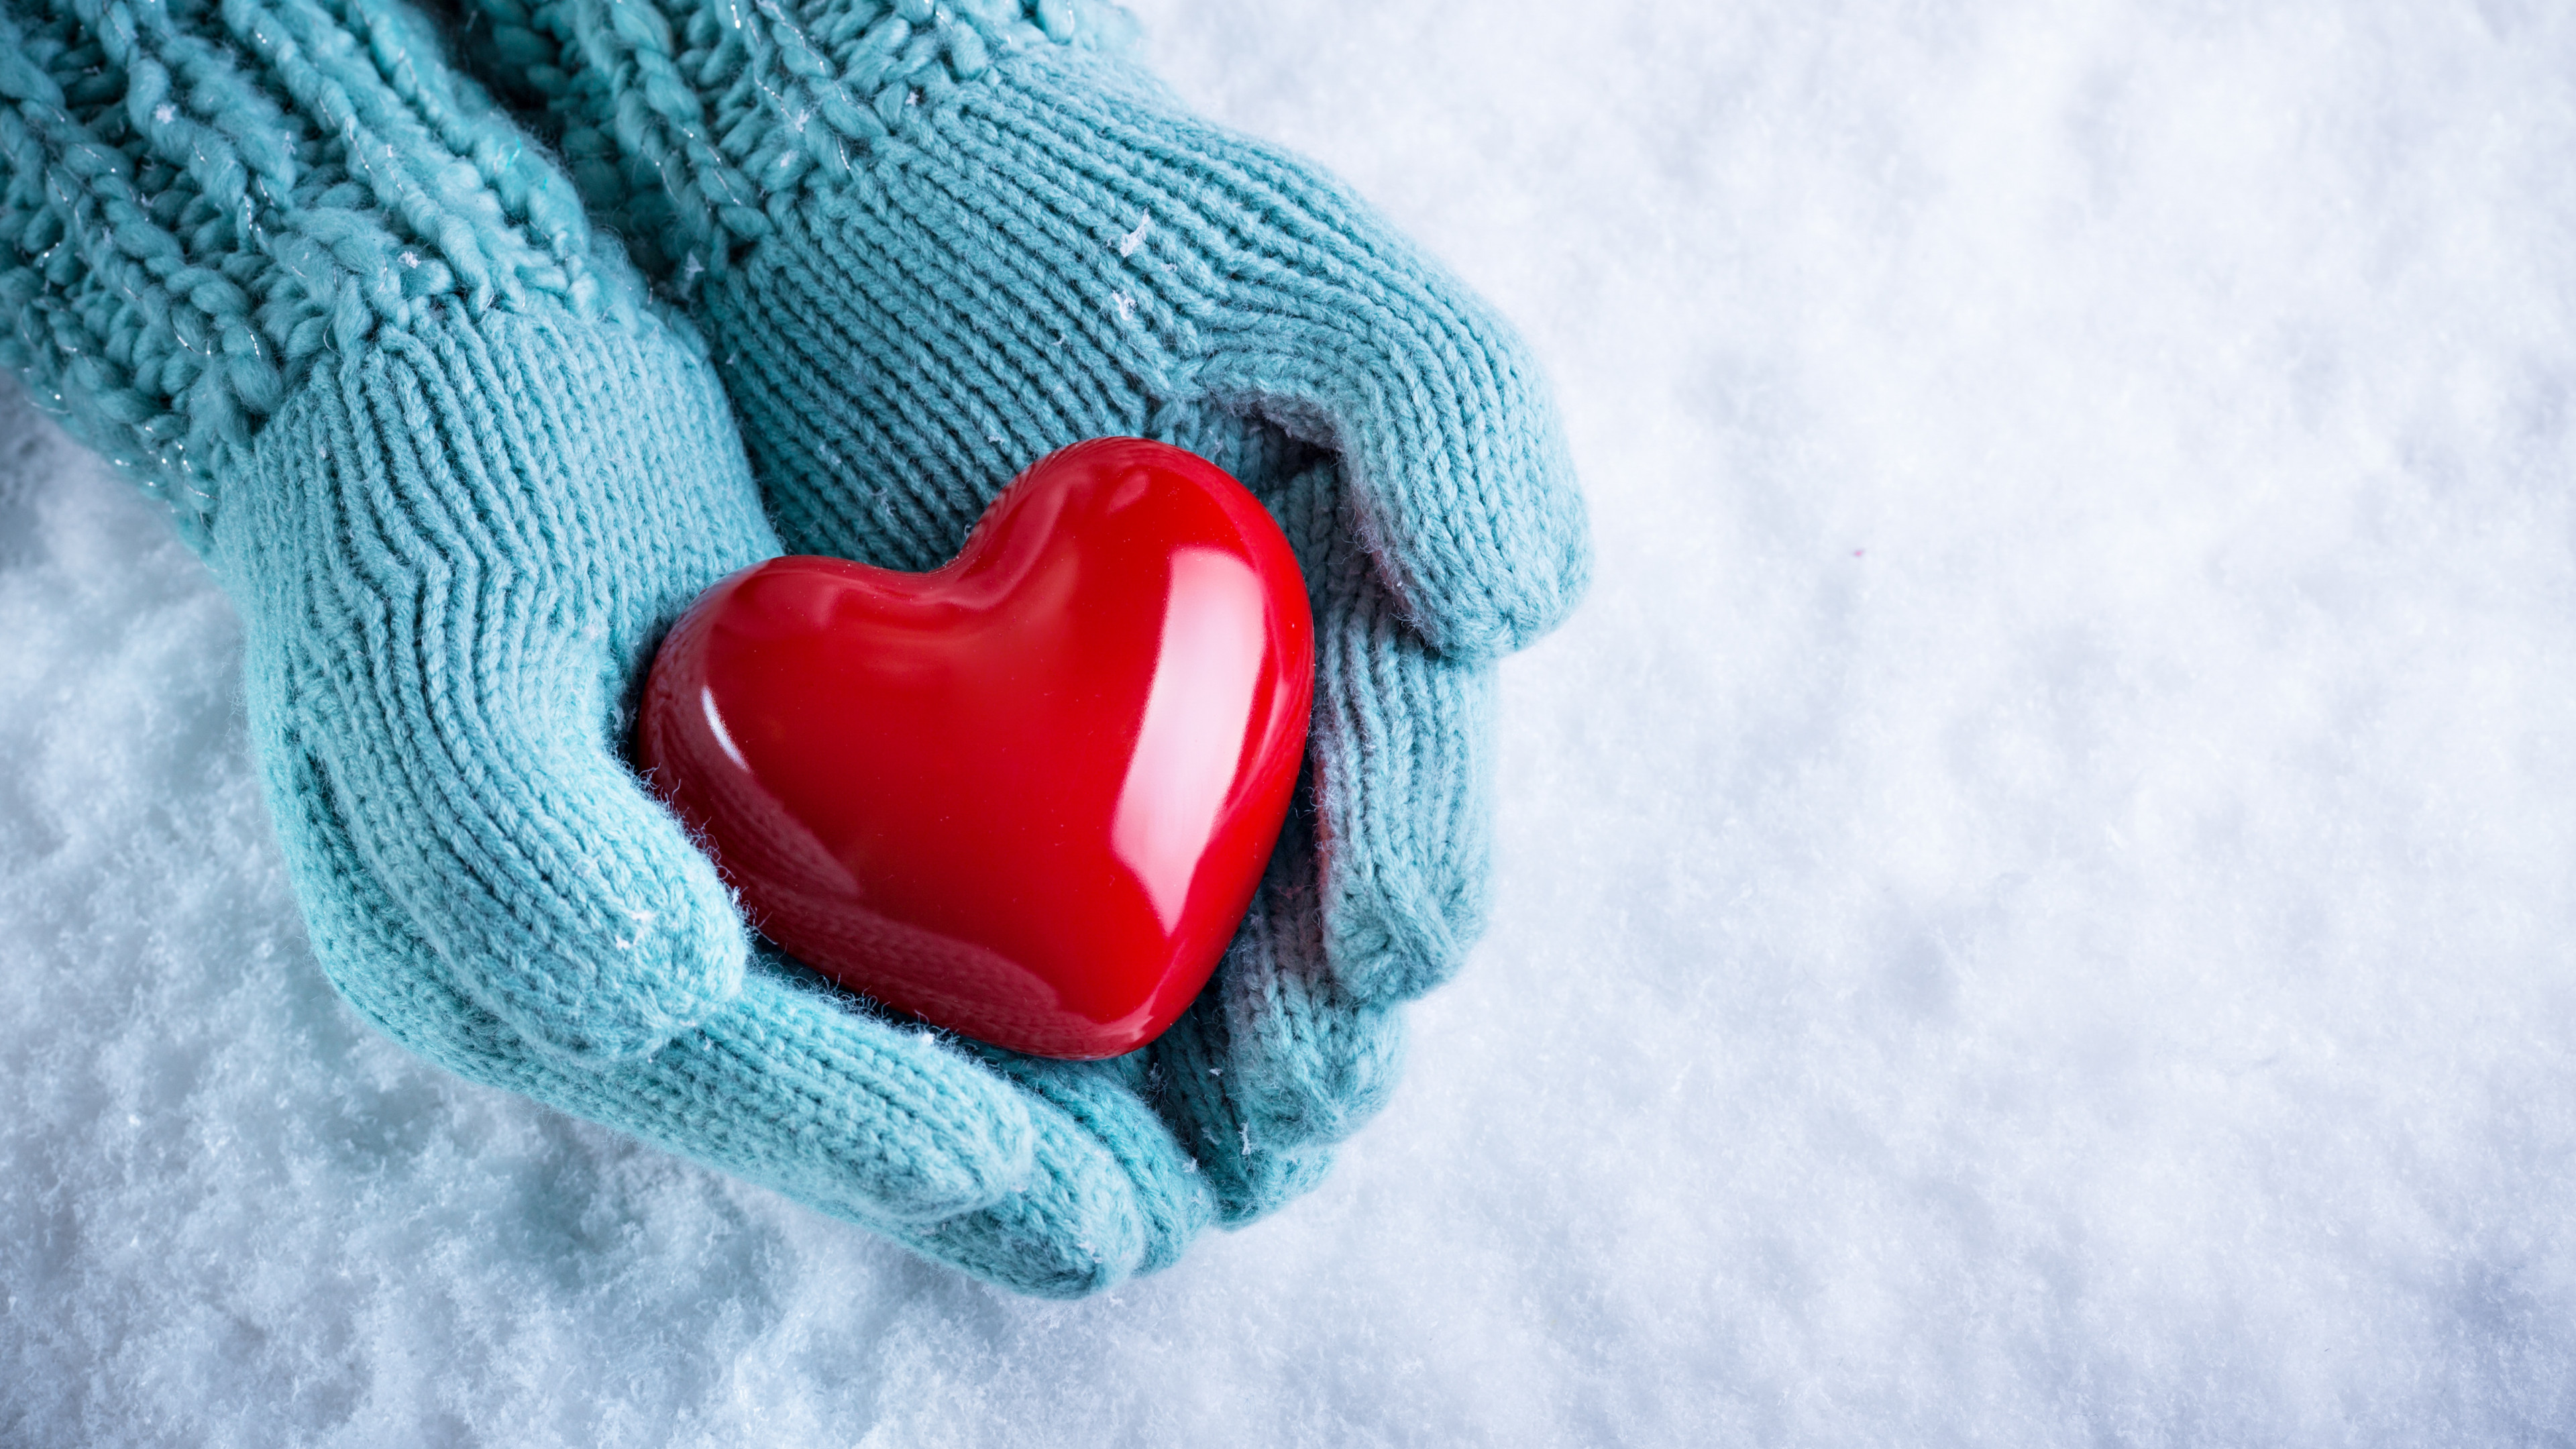 Stock Images love image, hand, snow, heart, 4k, Stock Images #16774